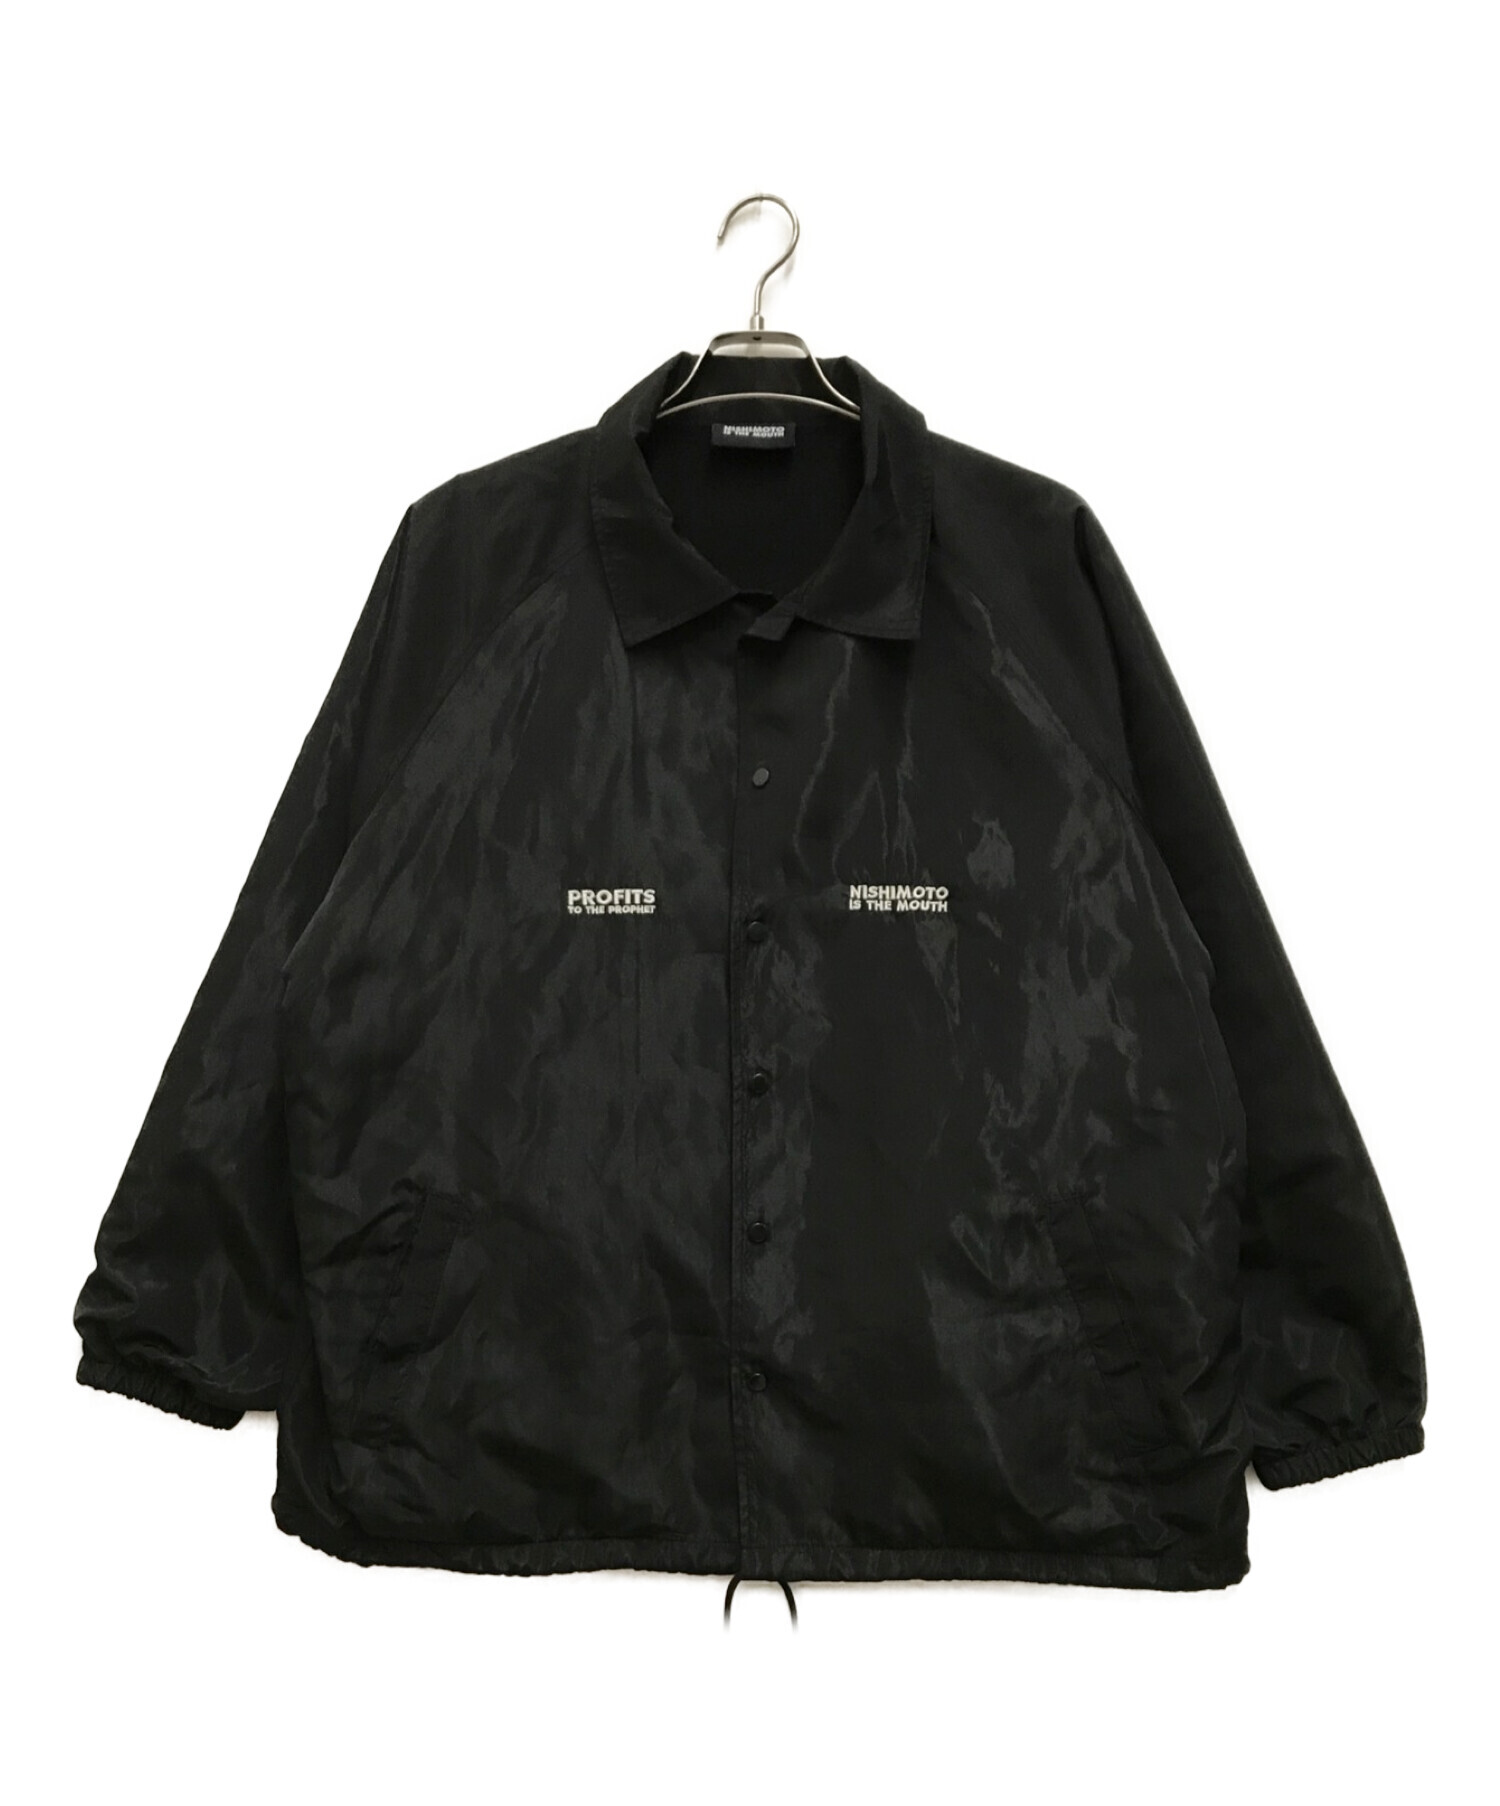 NISHIMOTO IS THE MOUTH (ニシモトイズザマウス) Prophet Coin Coach Jacket ブラック サイズ:M-L